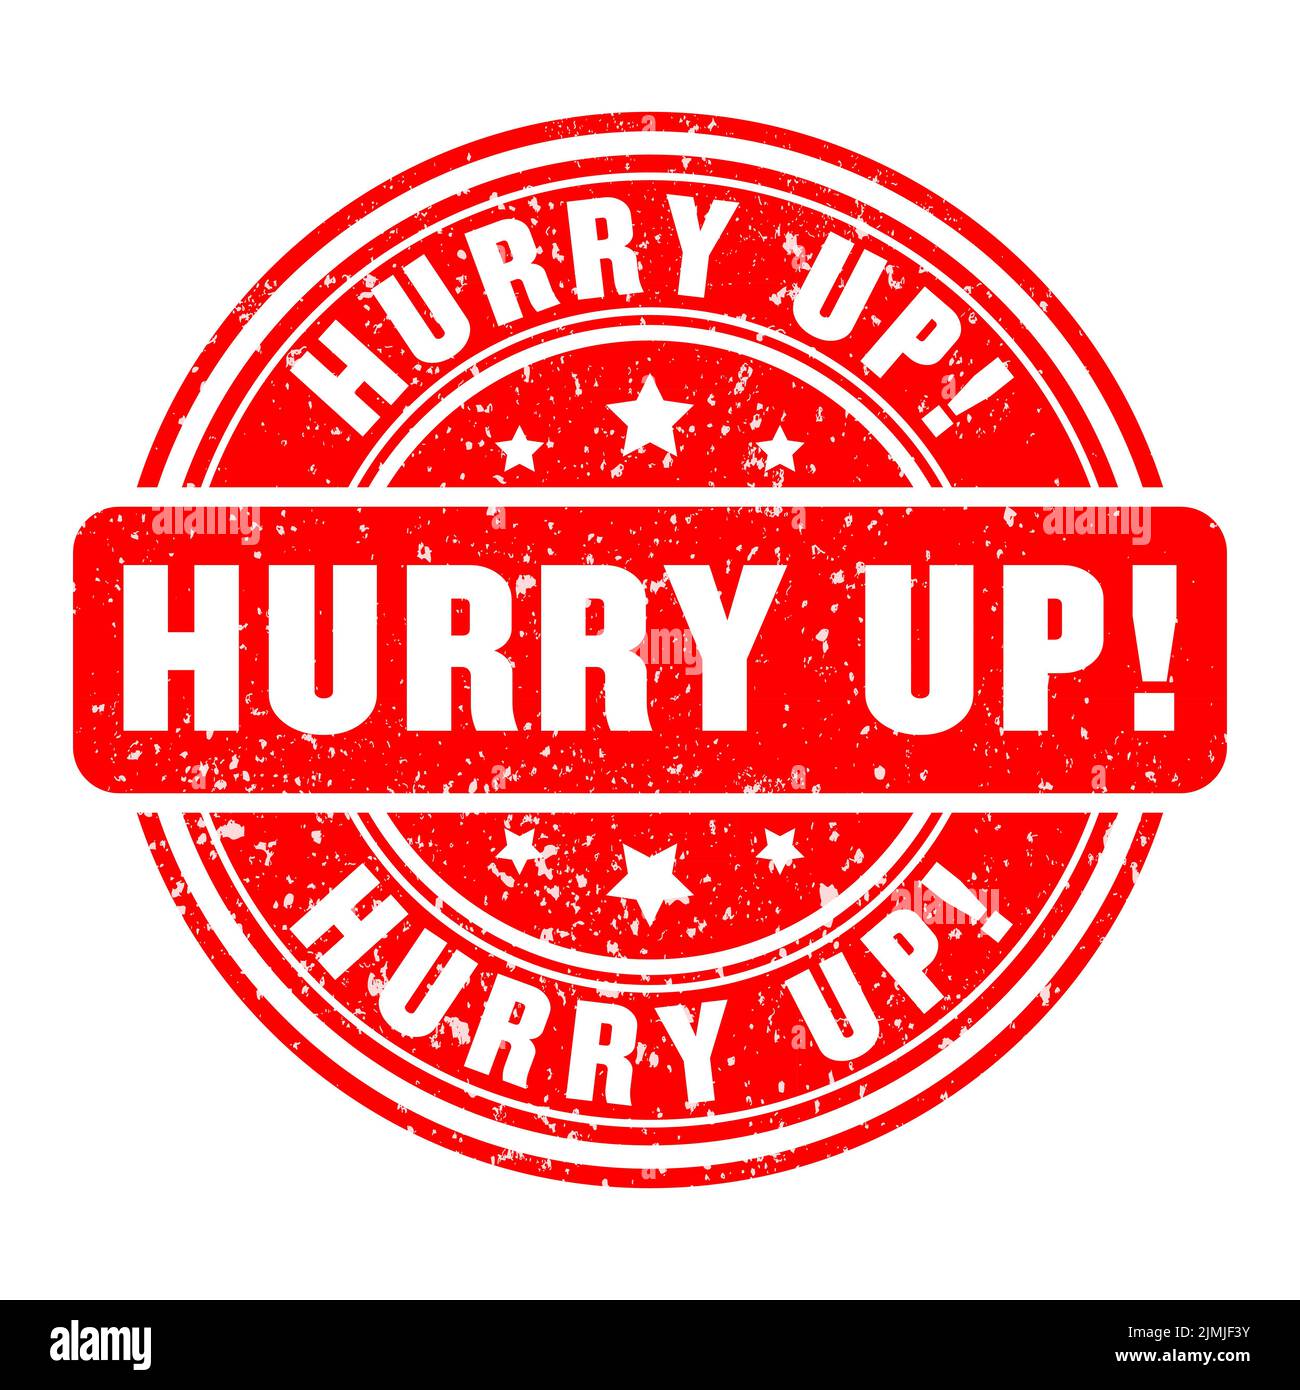 https://c8.alamy.com/comp/2JMJF3Y/red-imprint-hurry-up-dont-miss-vector-illustration-on-white-background-2JMJF3Y.jpg